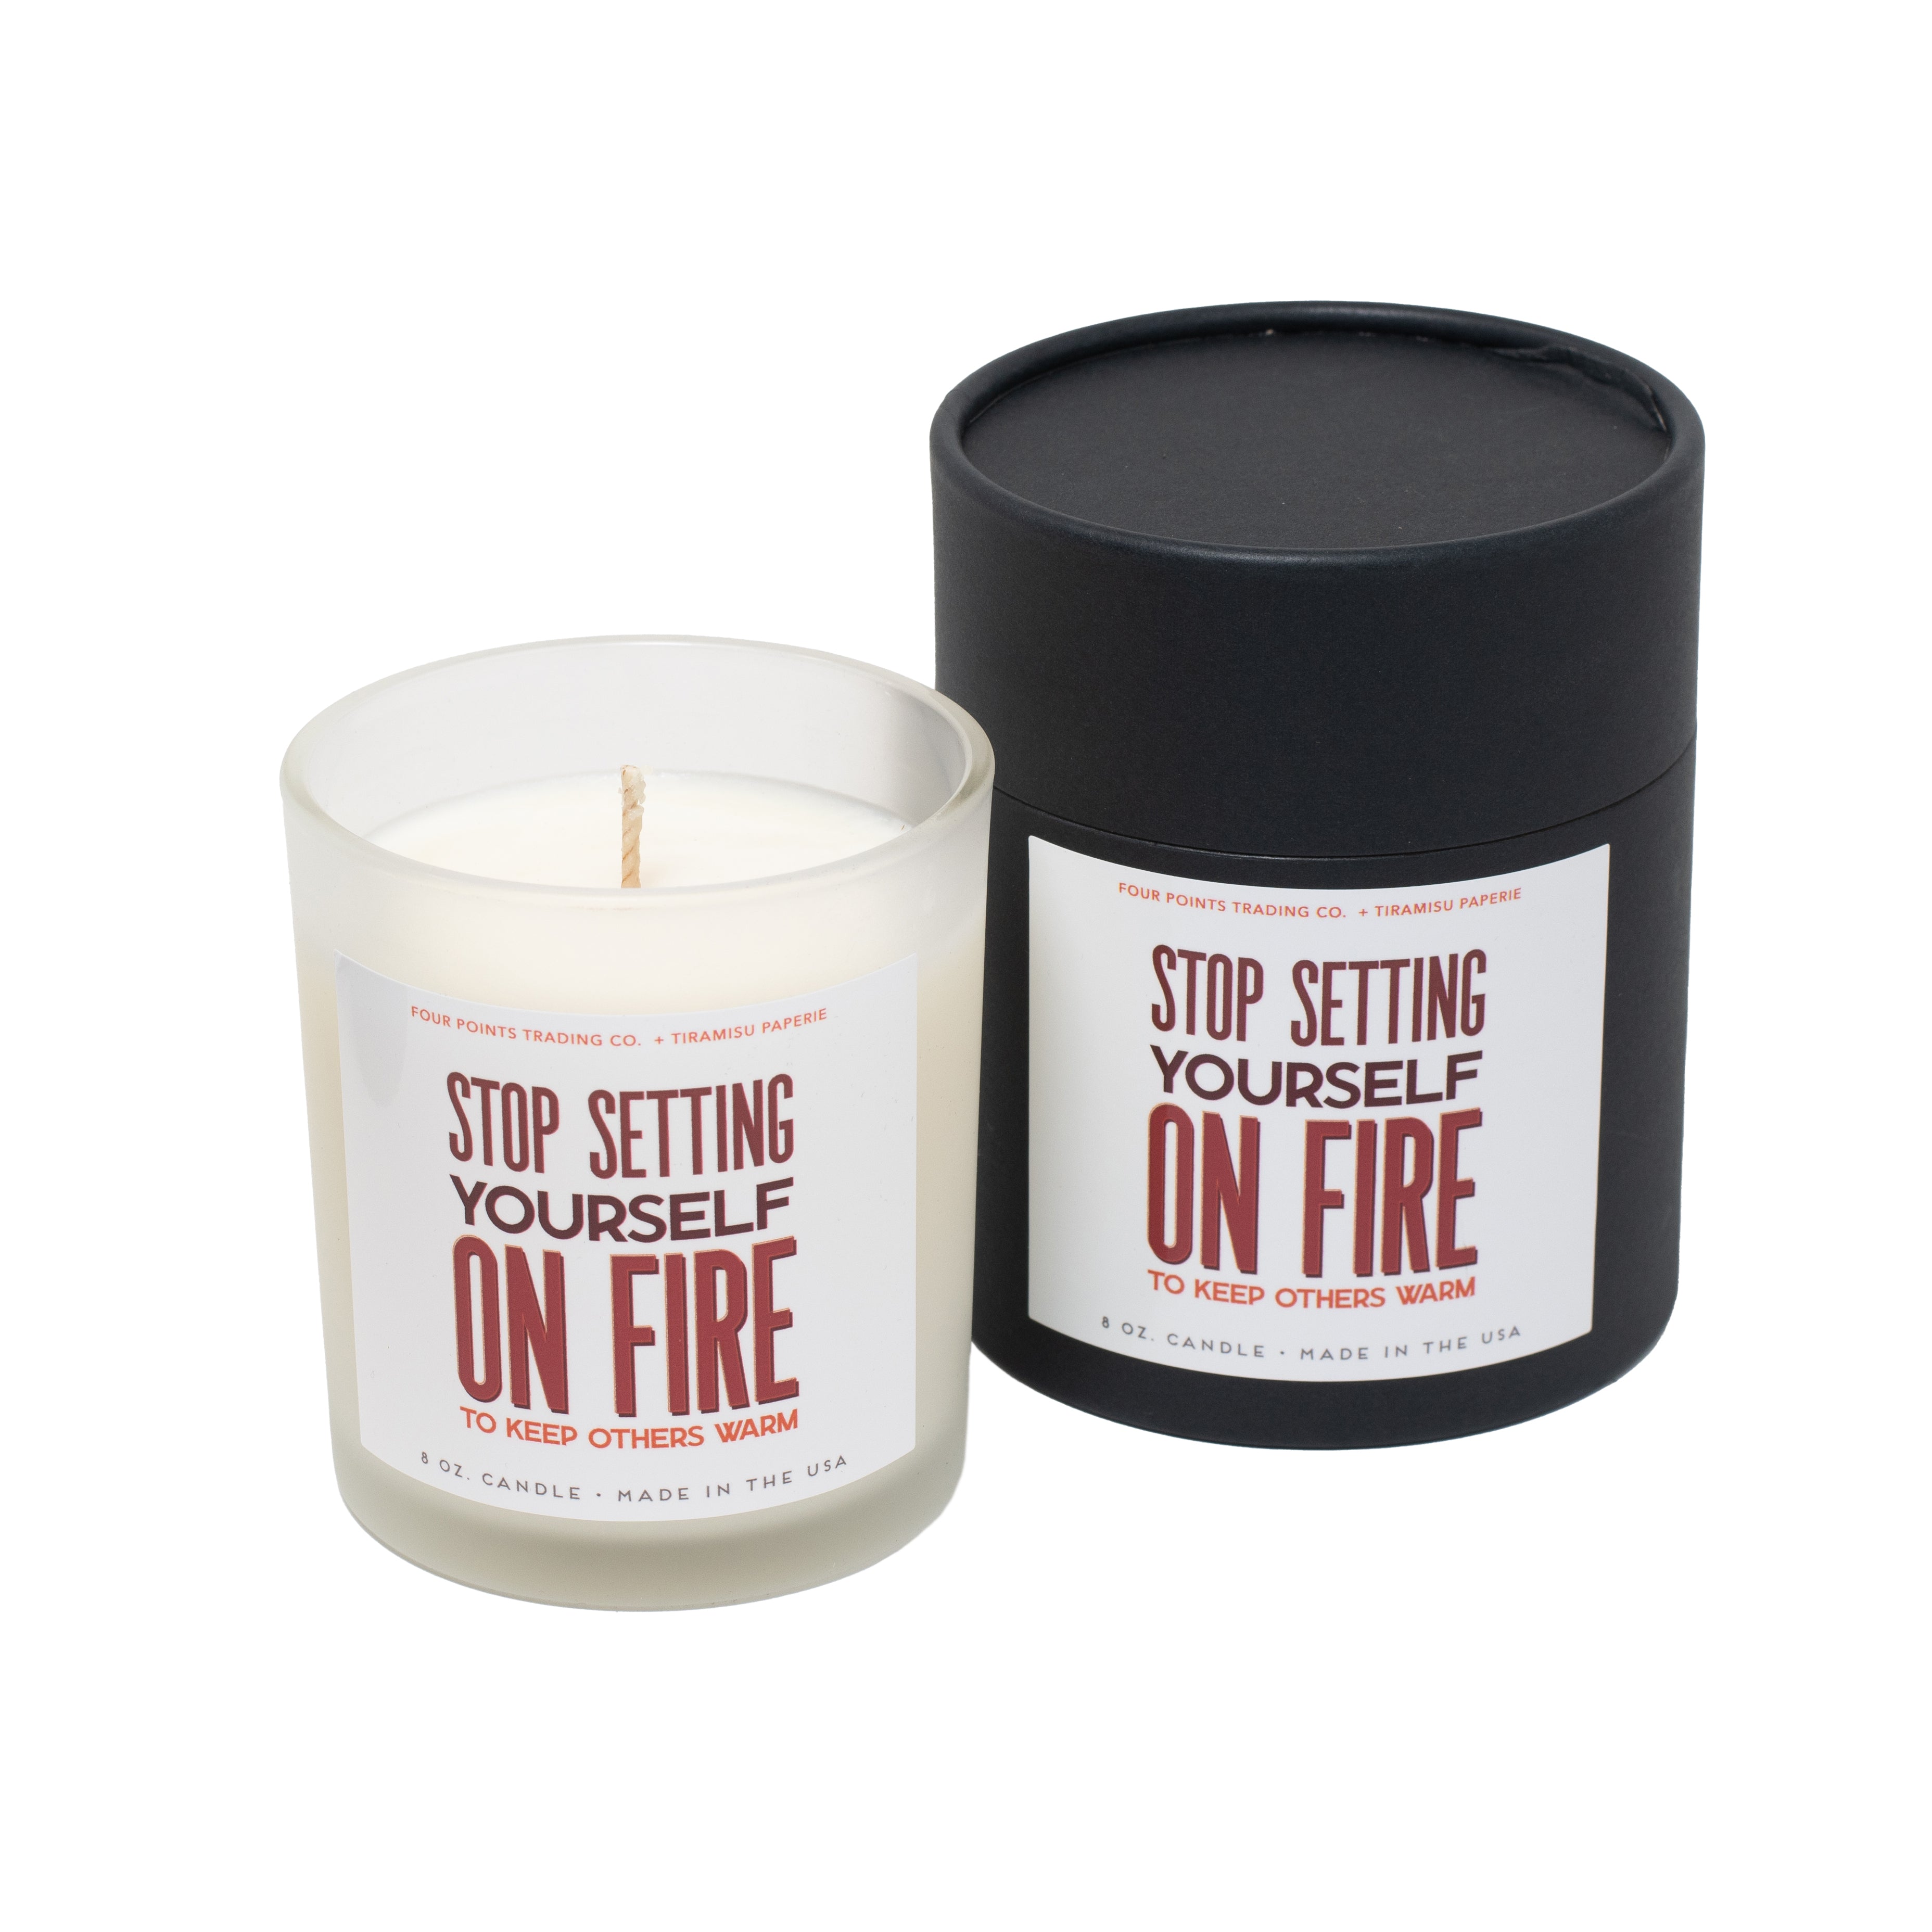 Stop Setting Yourself on Fire 8oz Soy Candle by Four Points Trading Co.